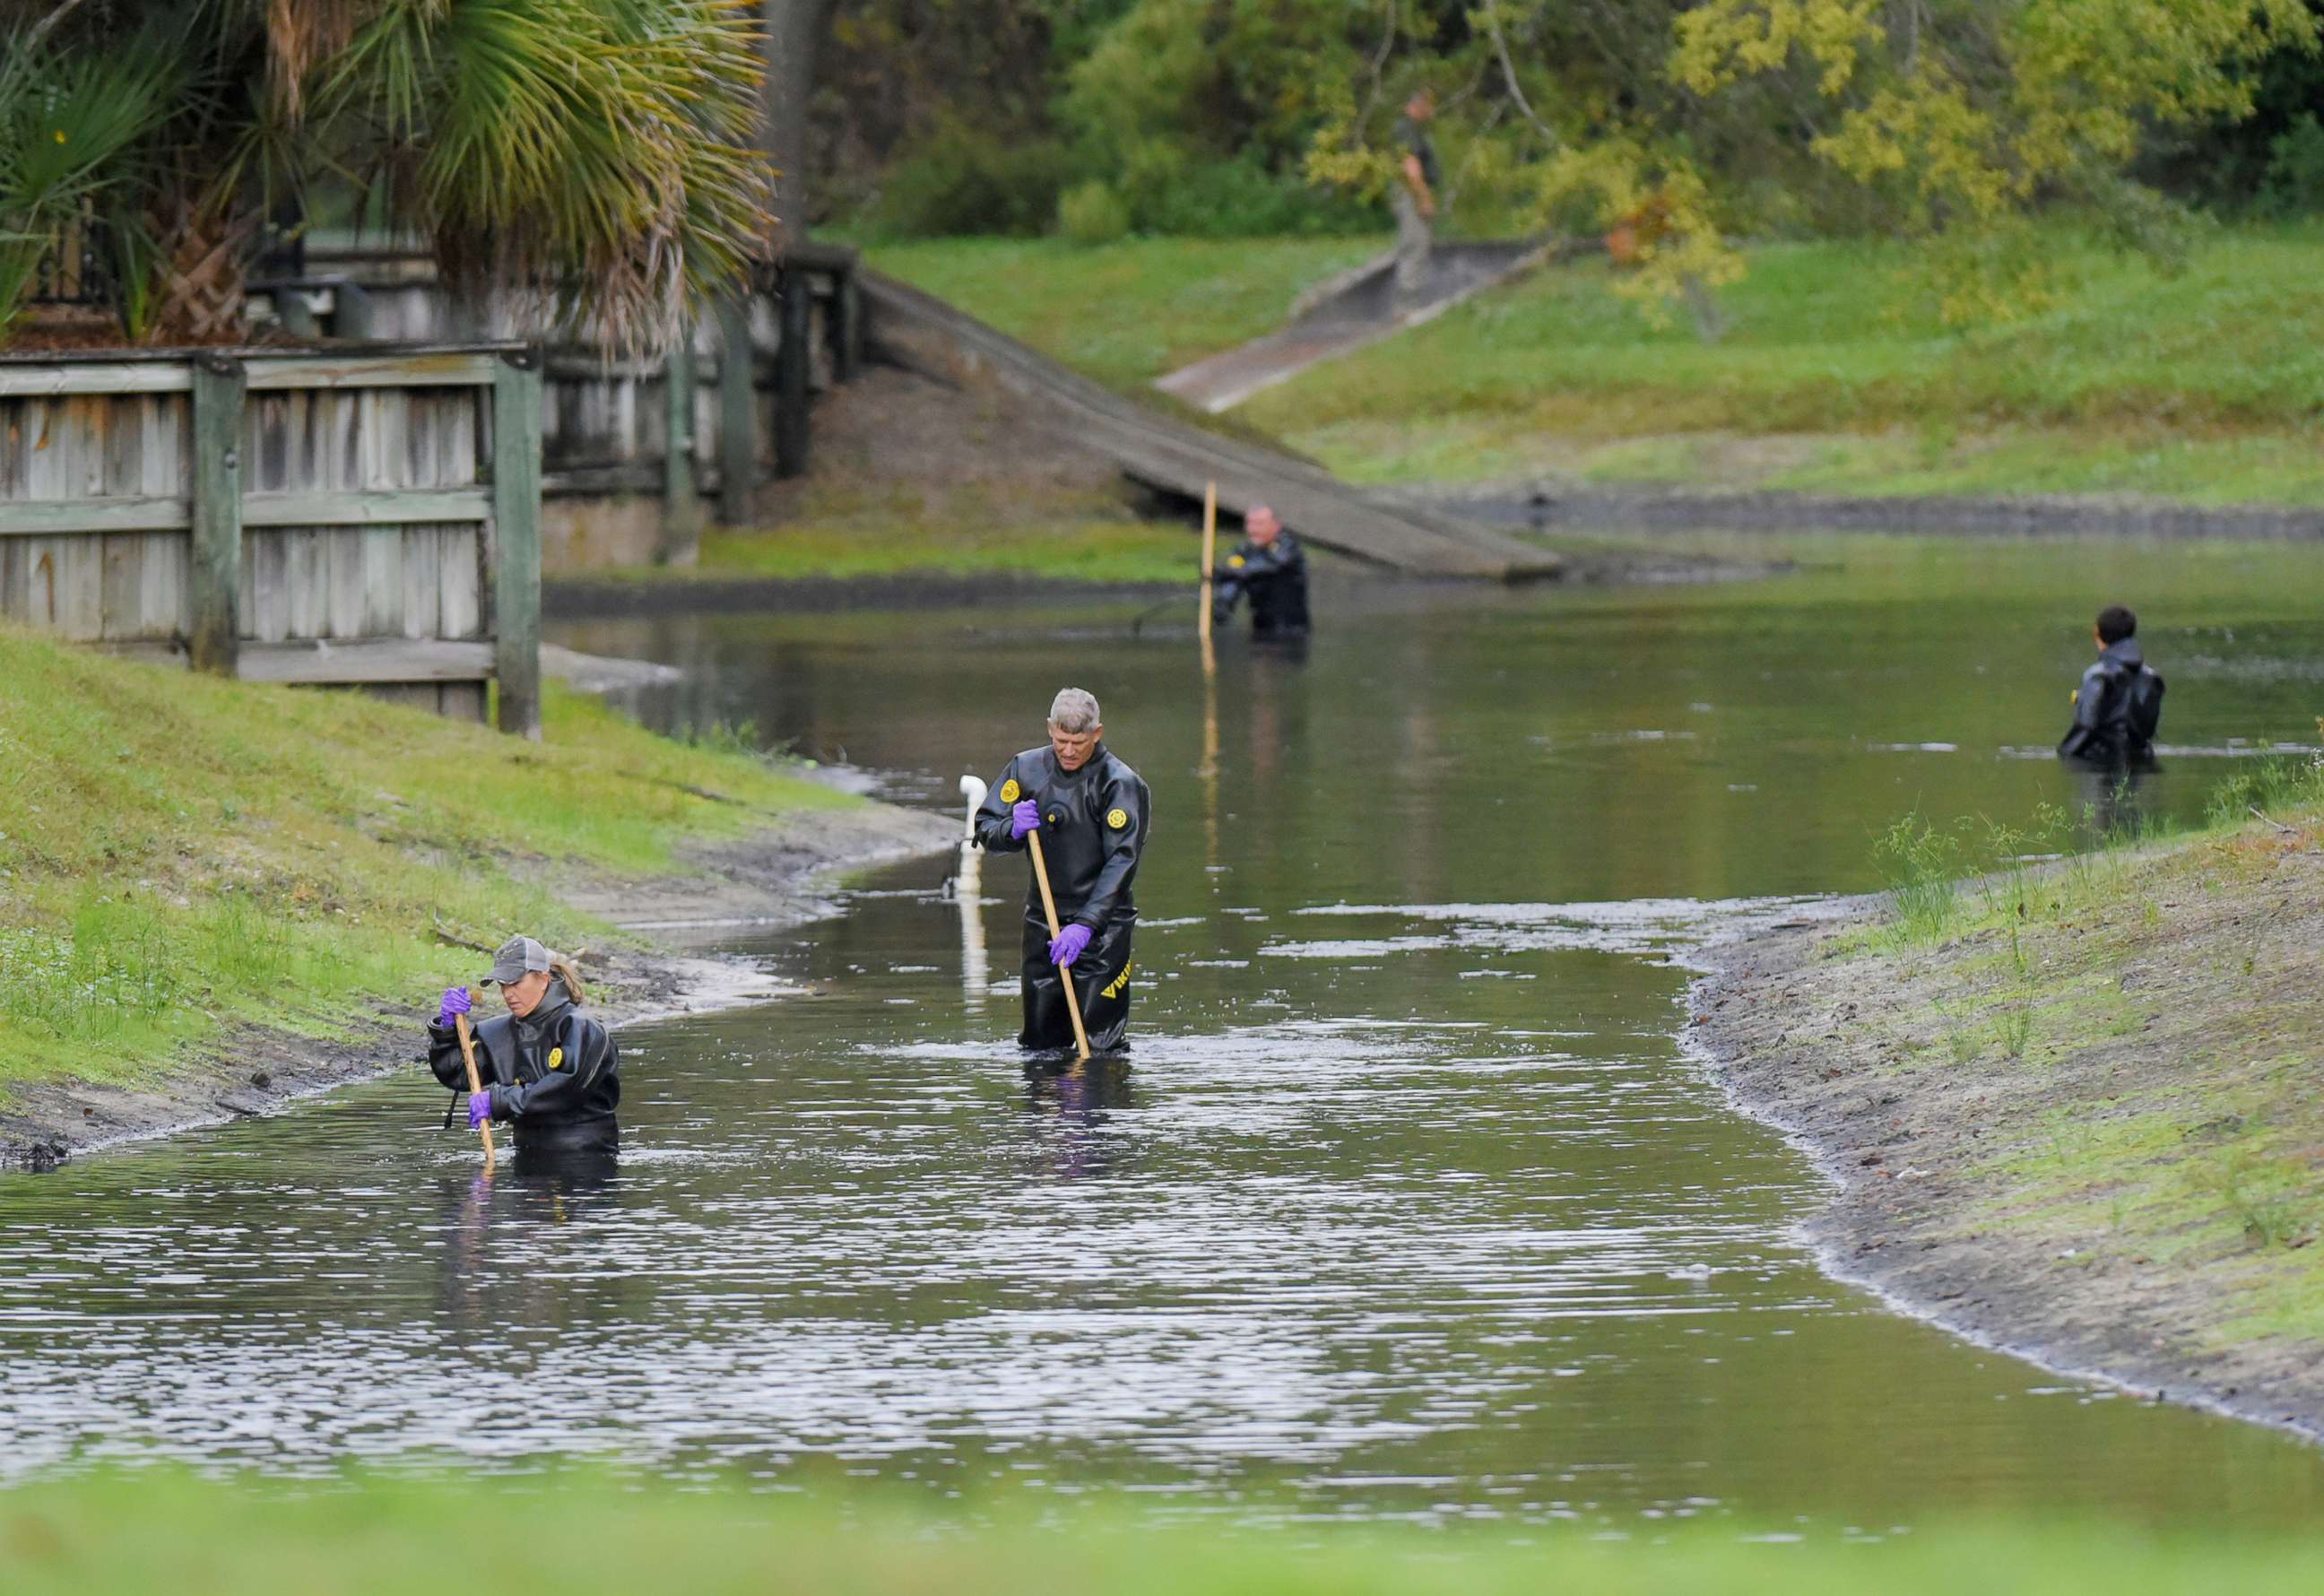 PHOTO: Law enforcement investigators in dry suits search the small retention pond near the entrance of the Southside Villas apartment complex in Jacksonville, Fla., Nov. 6, 2019.